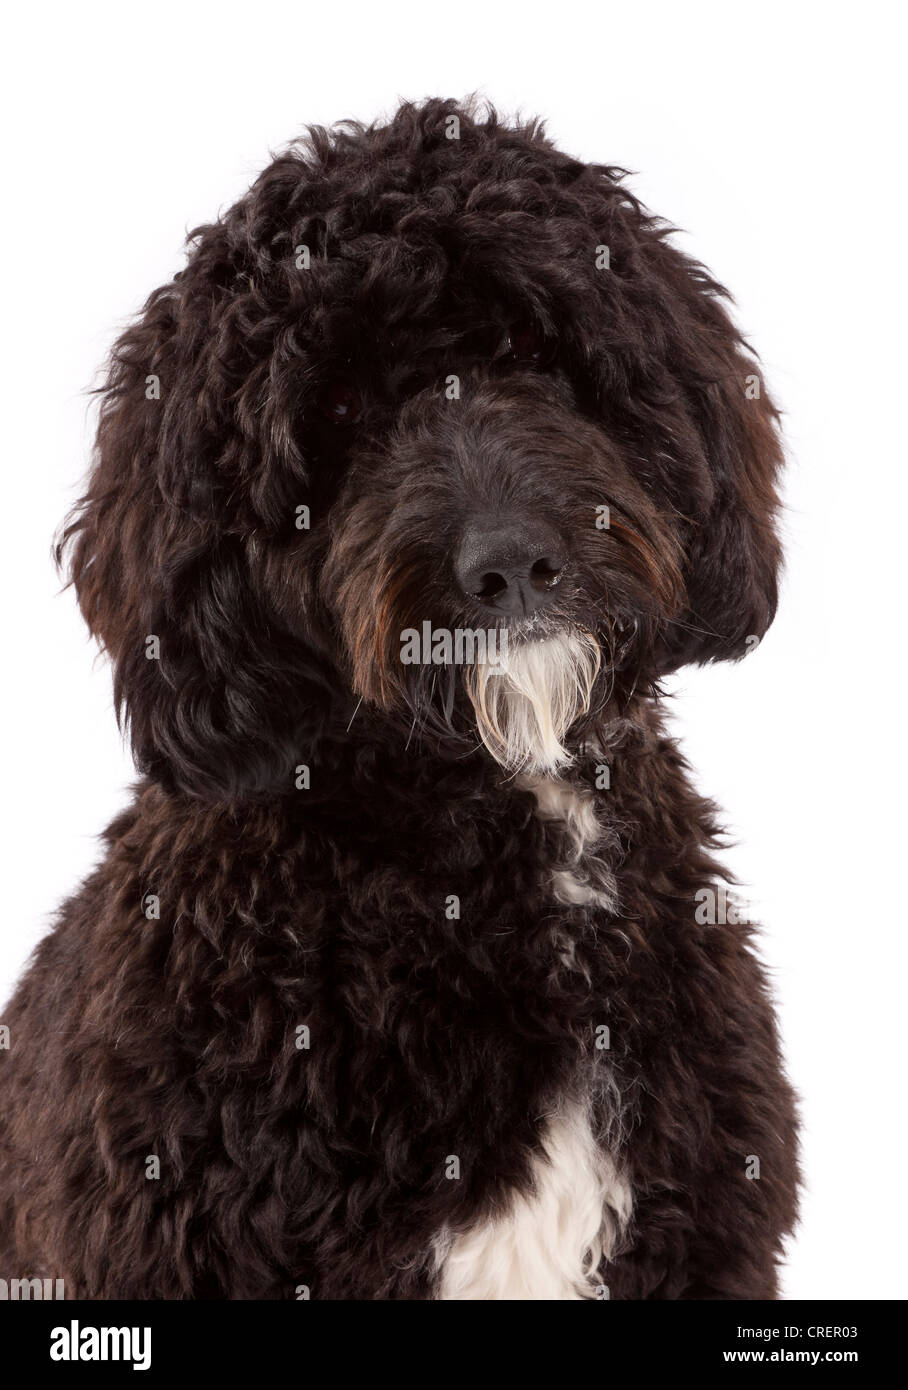 Cockerpoo male dog at 1 year old. Cross between a Cocker Spaniel and a Poodle. Stock Photo